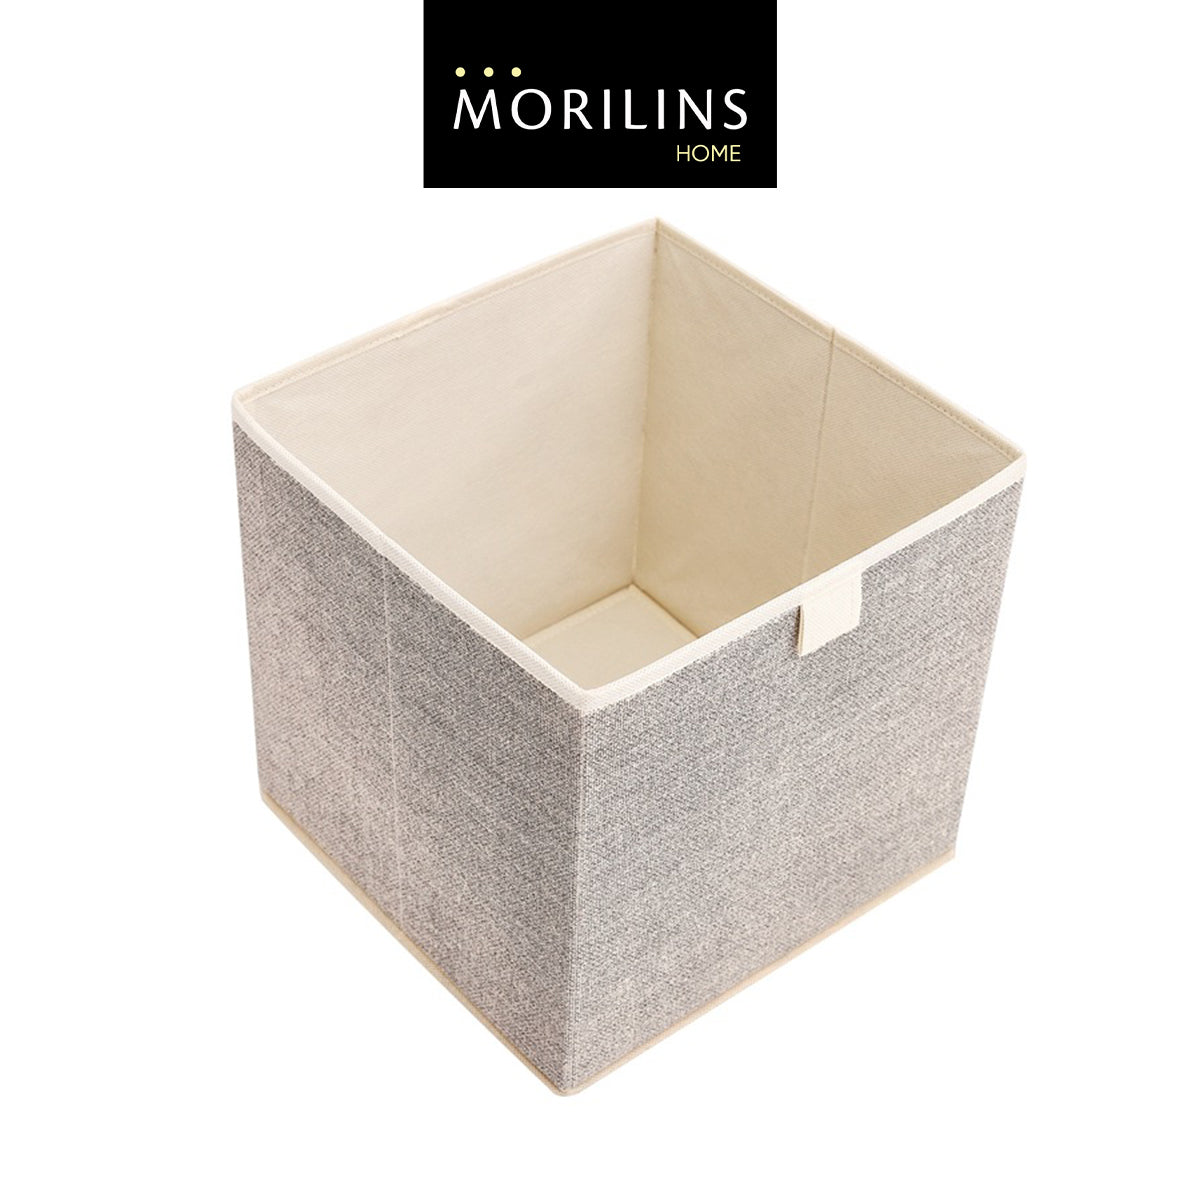 [Morilins Home] Contemporary Collapsible Rigid Rectangle Woven Storage Bin With Pull Handle, A Space-Saving & Convenient Organization on Shelves - Bloom Concept